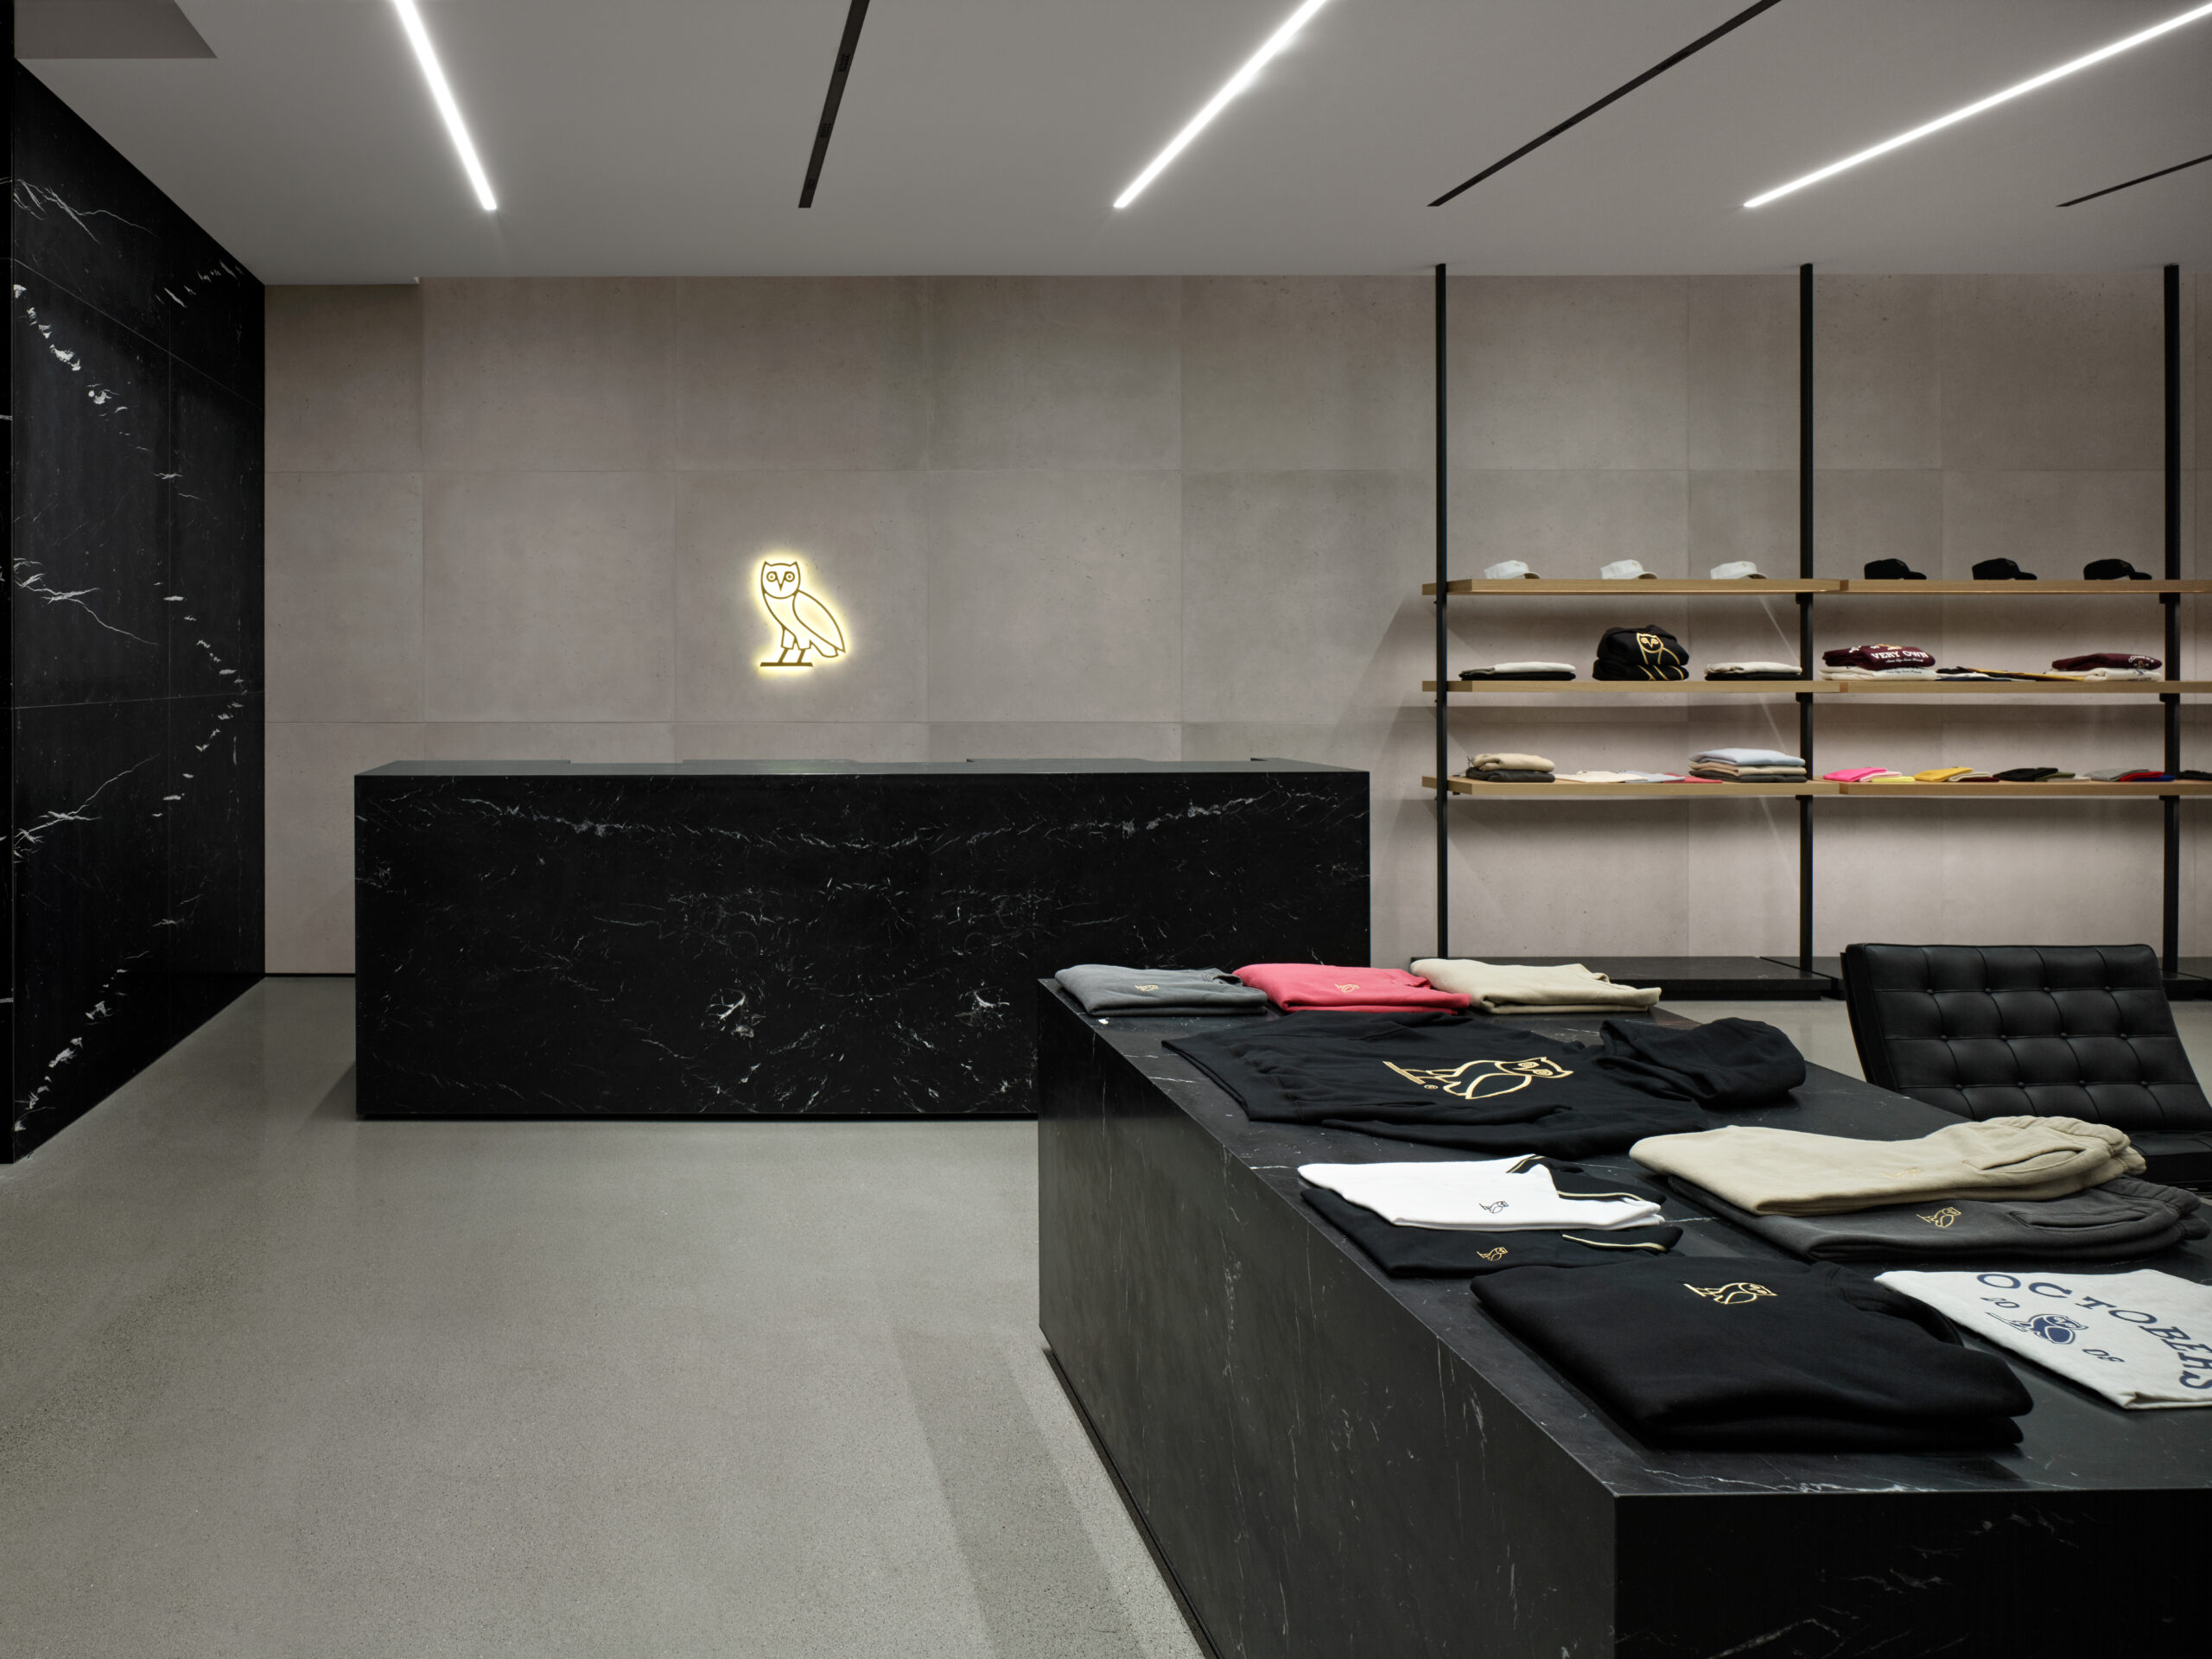 Sleek black counter with OVO logo in a modern retail space with concrete cladding and clothing display shelves.